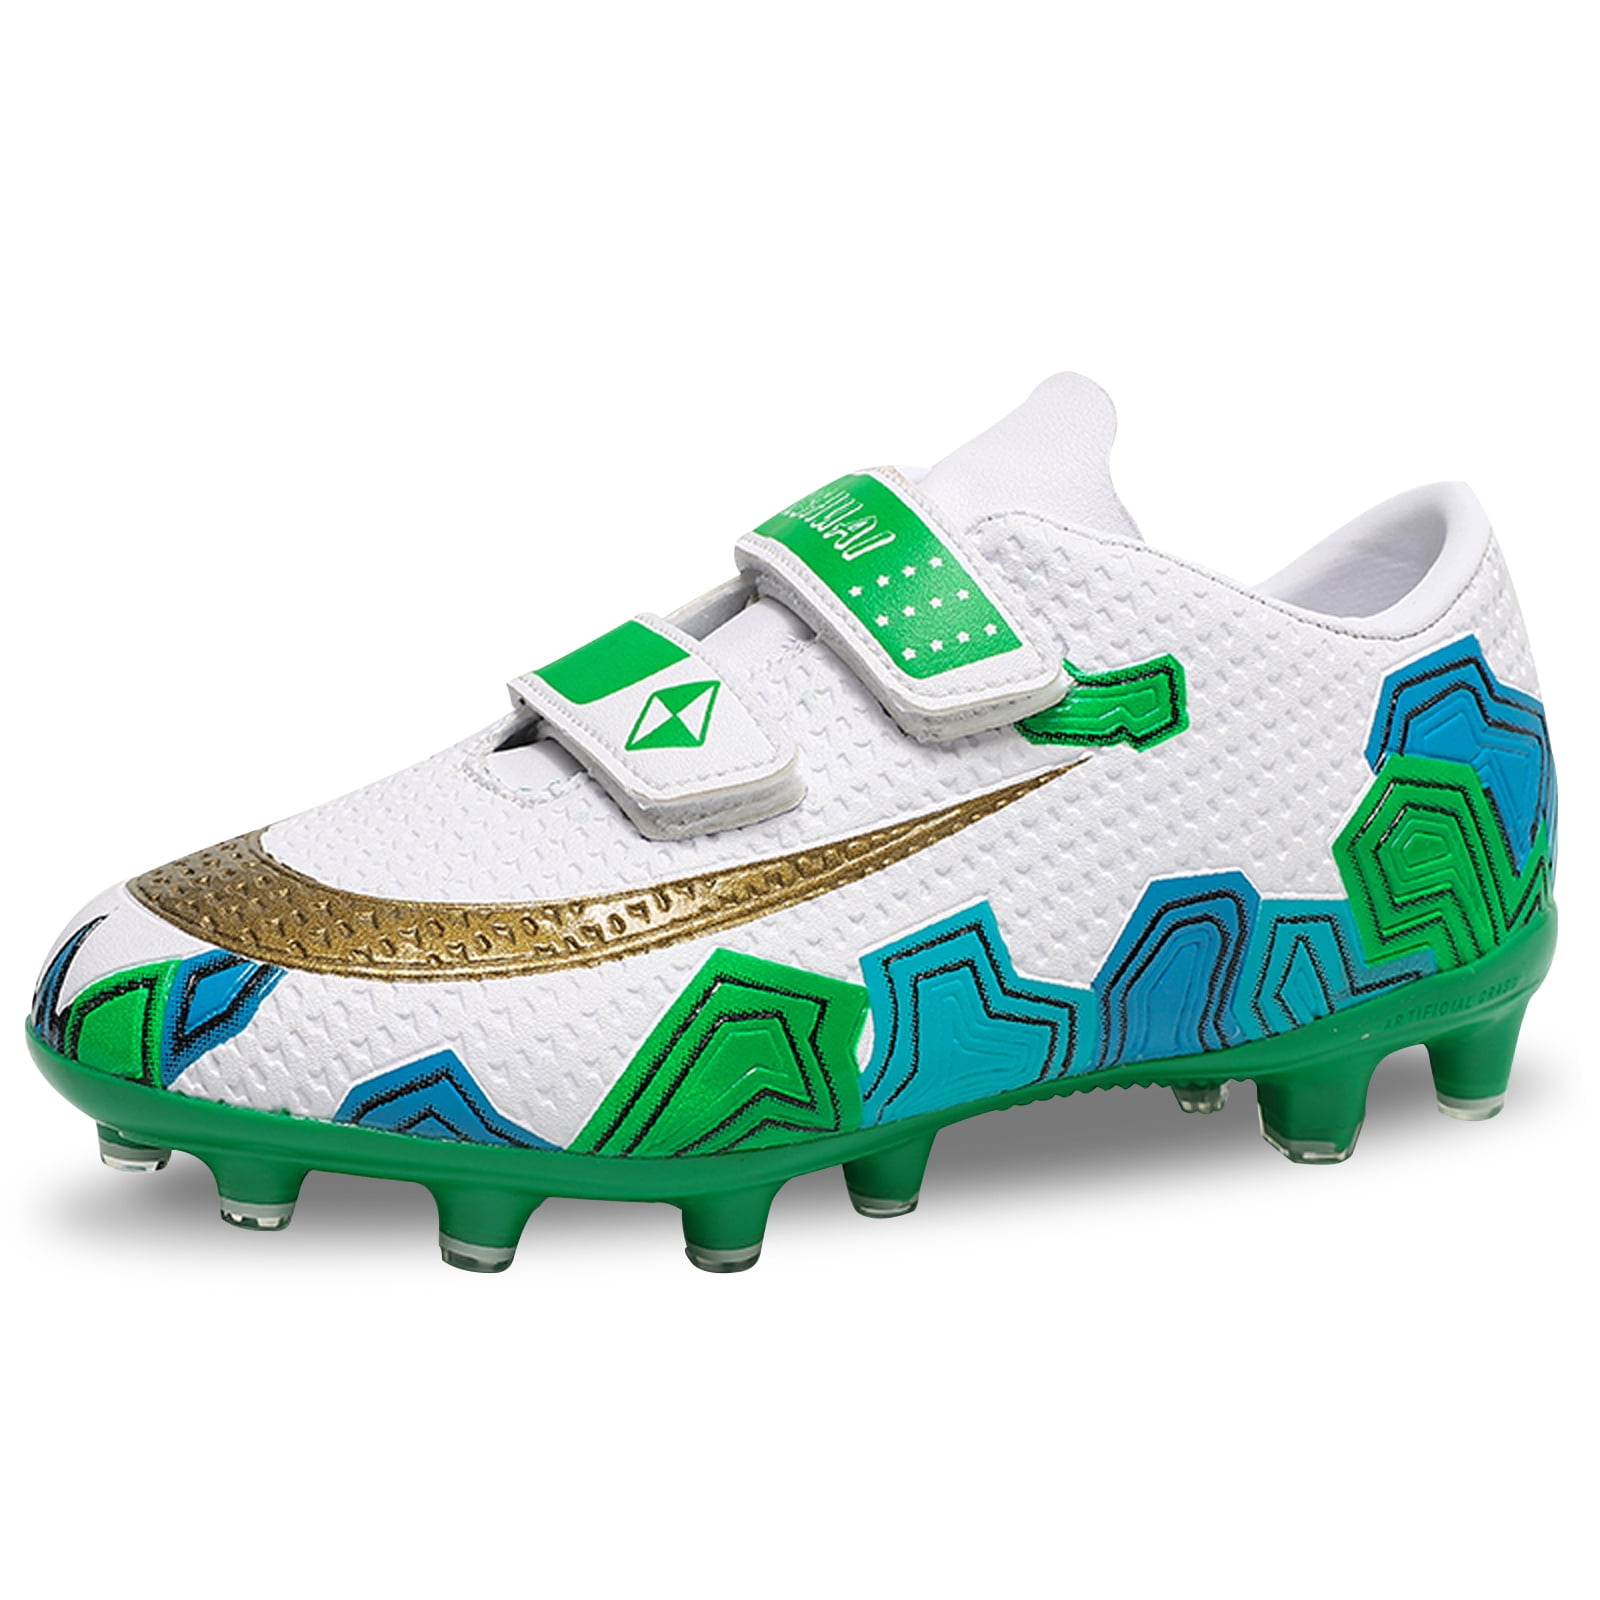 Unisex Kids Soccer Boots Club Anti-Slip Fast Moving Boy And Girl Football Shoes 